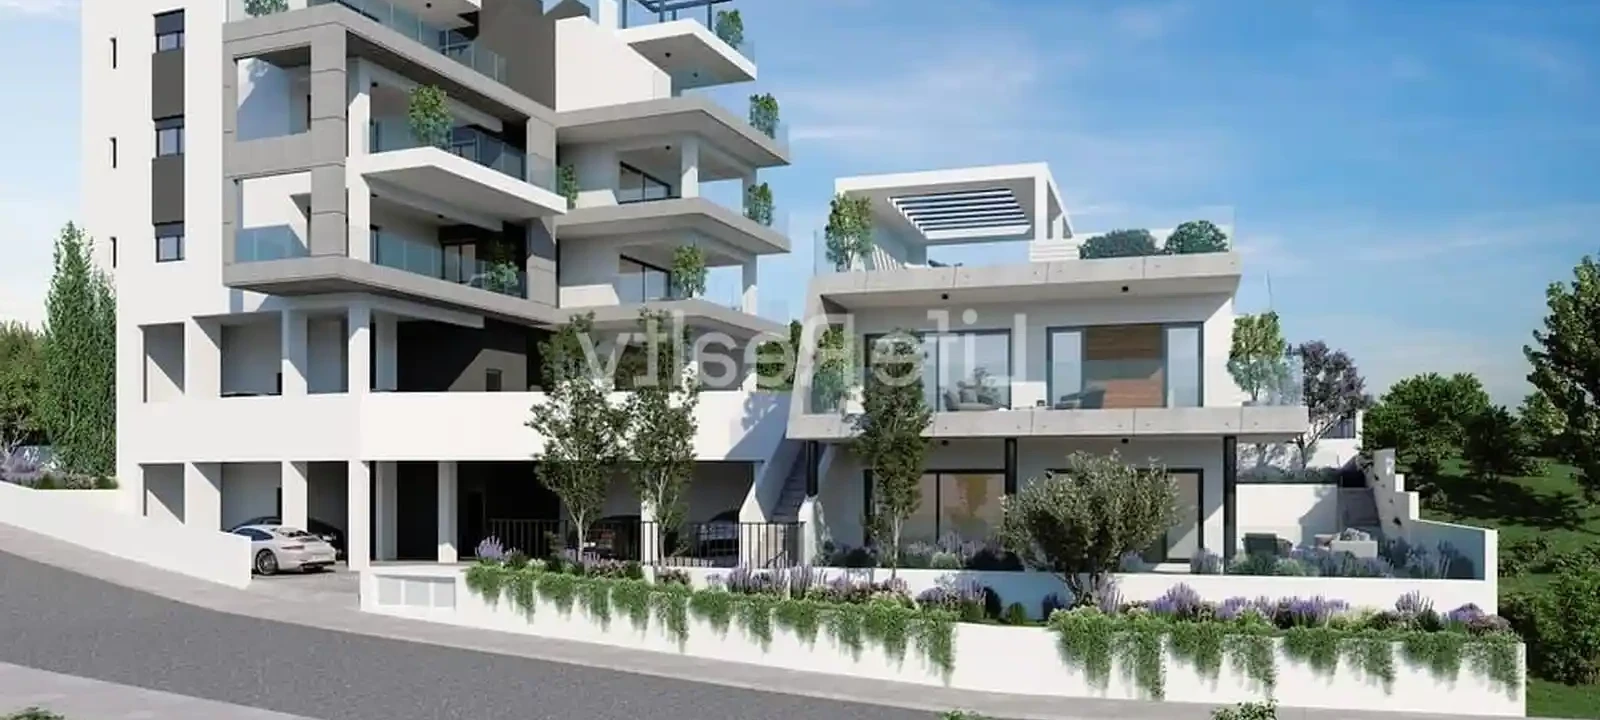 3-bedroom apartment fоr sаle €570.000, image 1